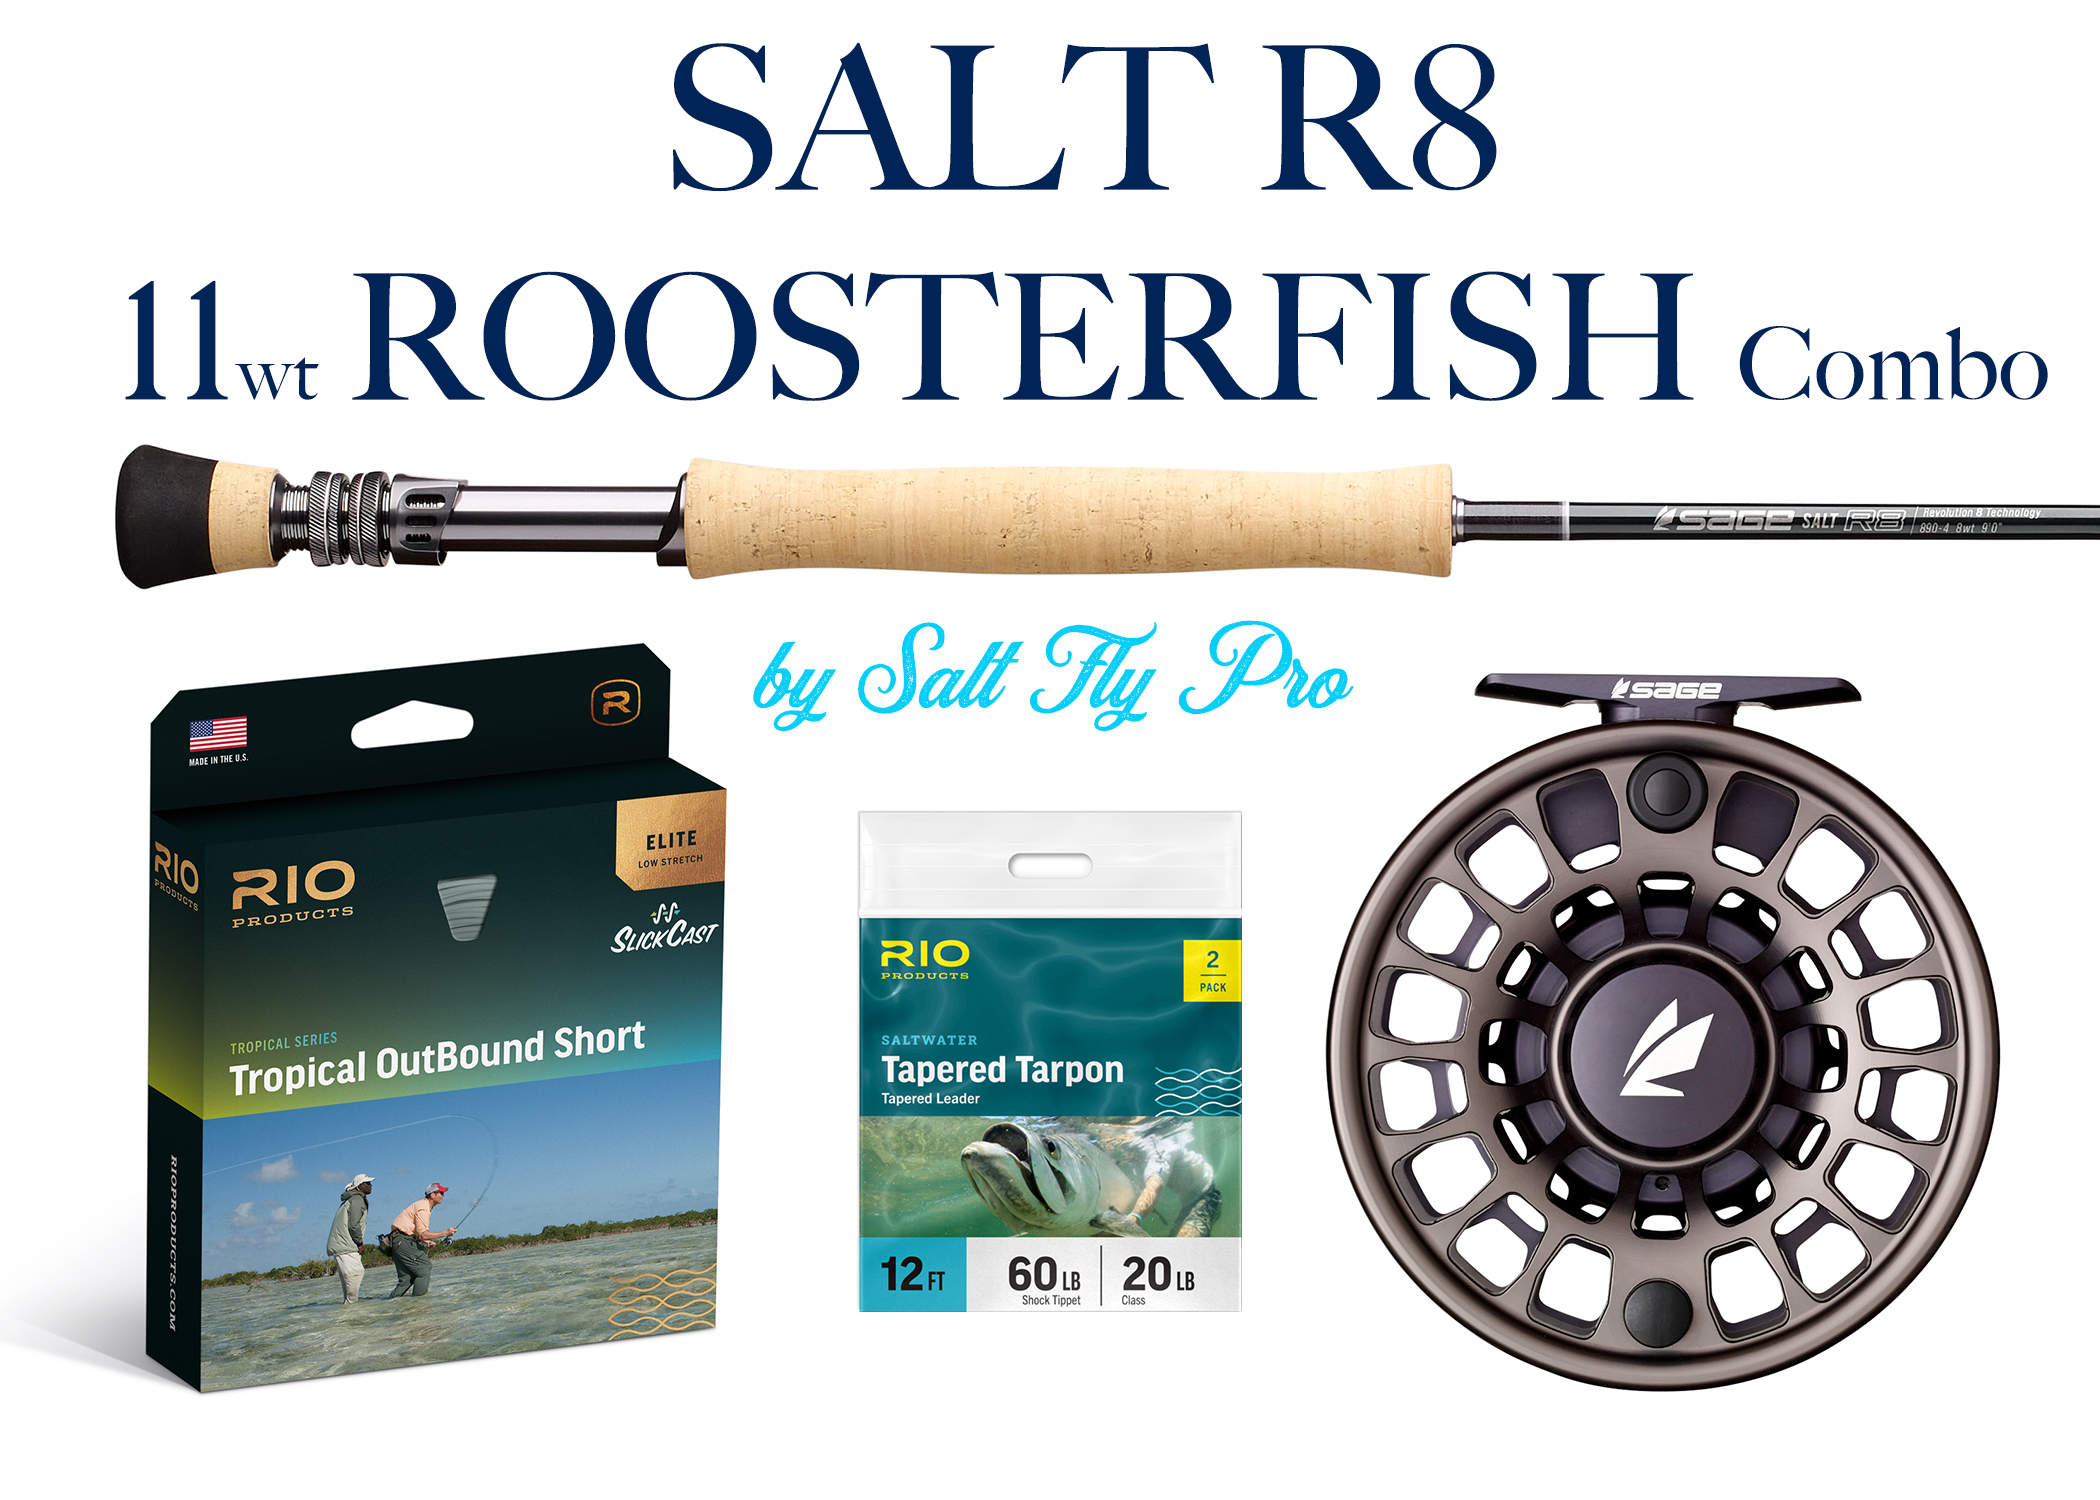 Sage SALT R8 11wt ROOSTERFISH Fly Rod Combo Outfit